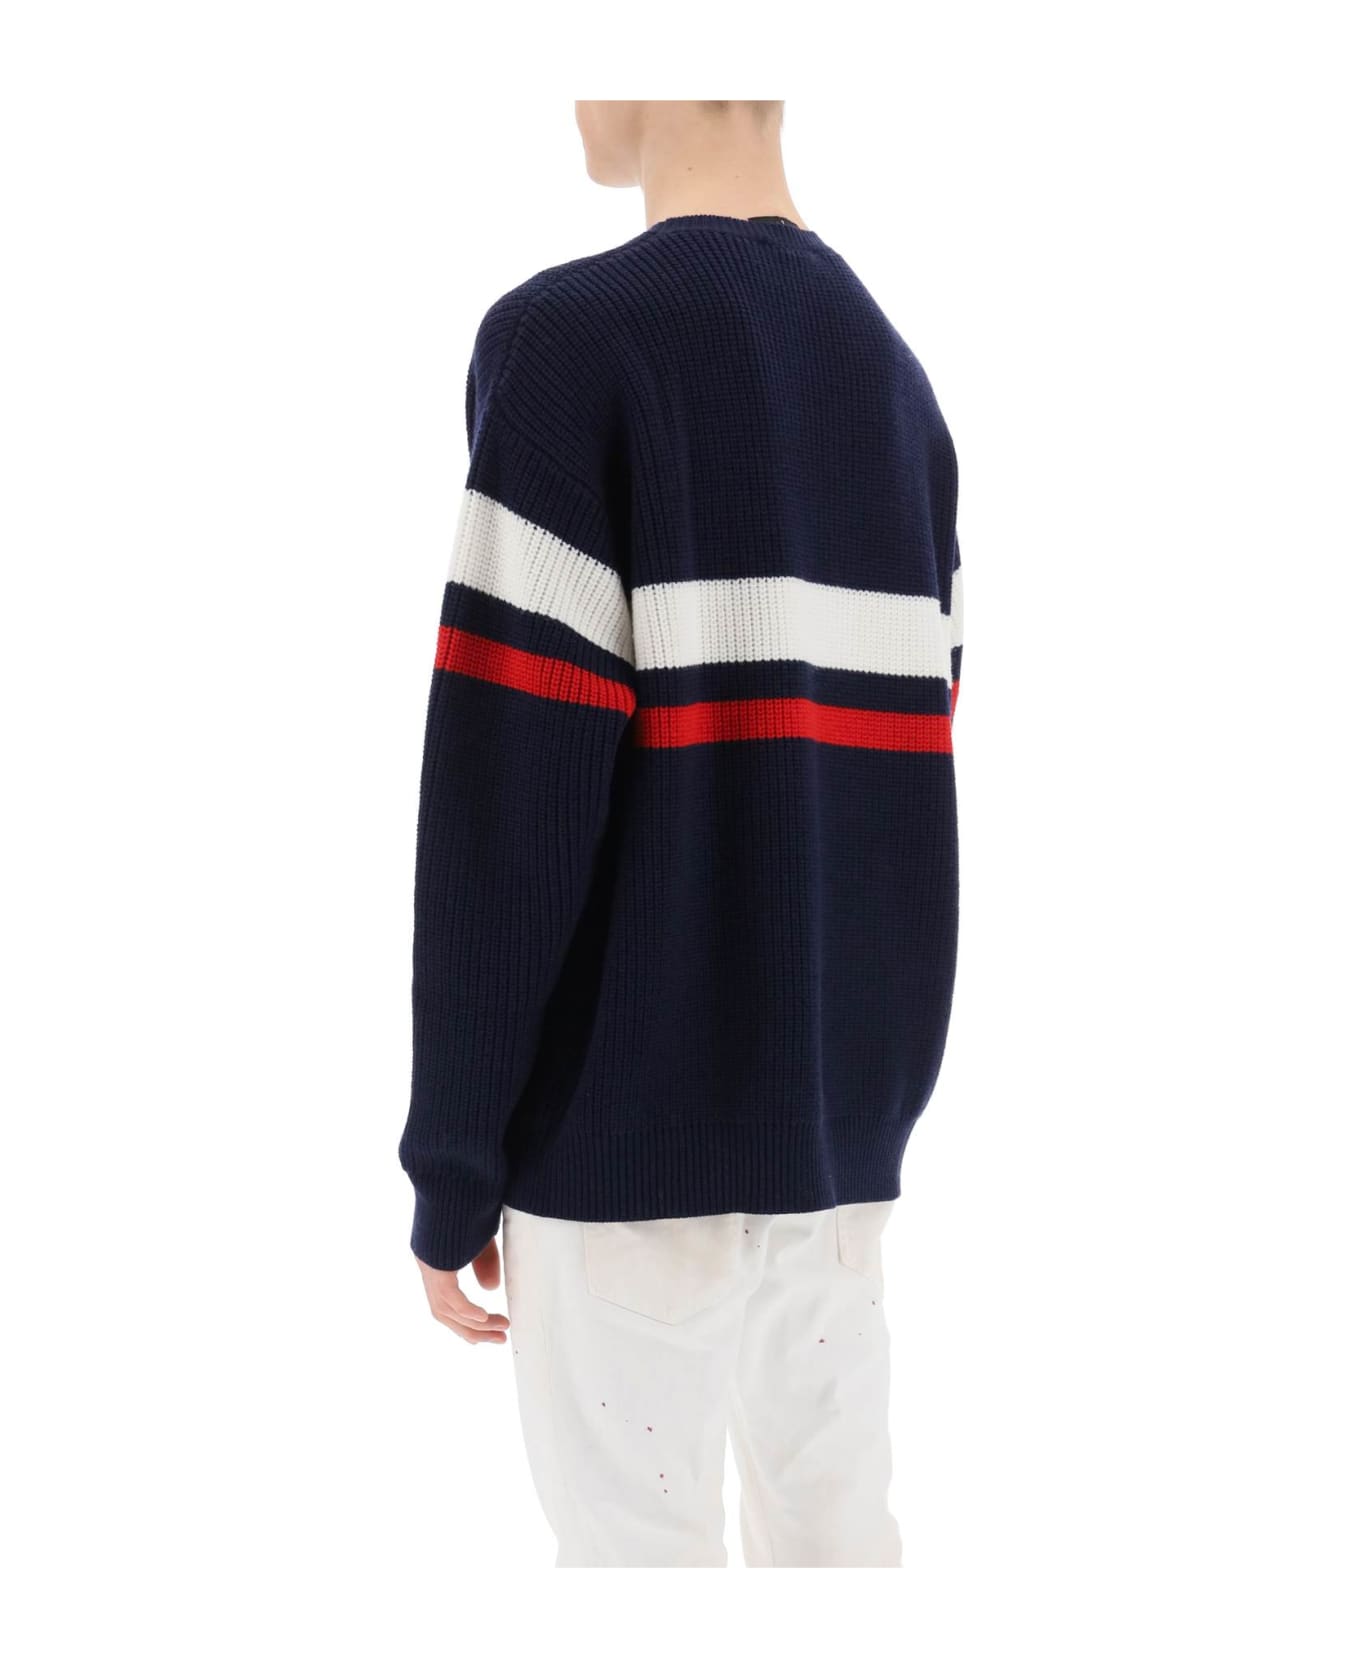 Dsquared2 Wool Sweater With Varsity Patch - BLUE WHITE RED (Blue)